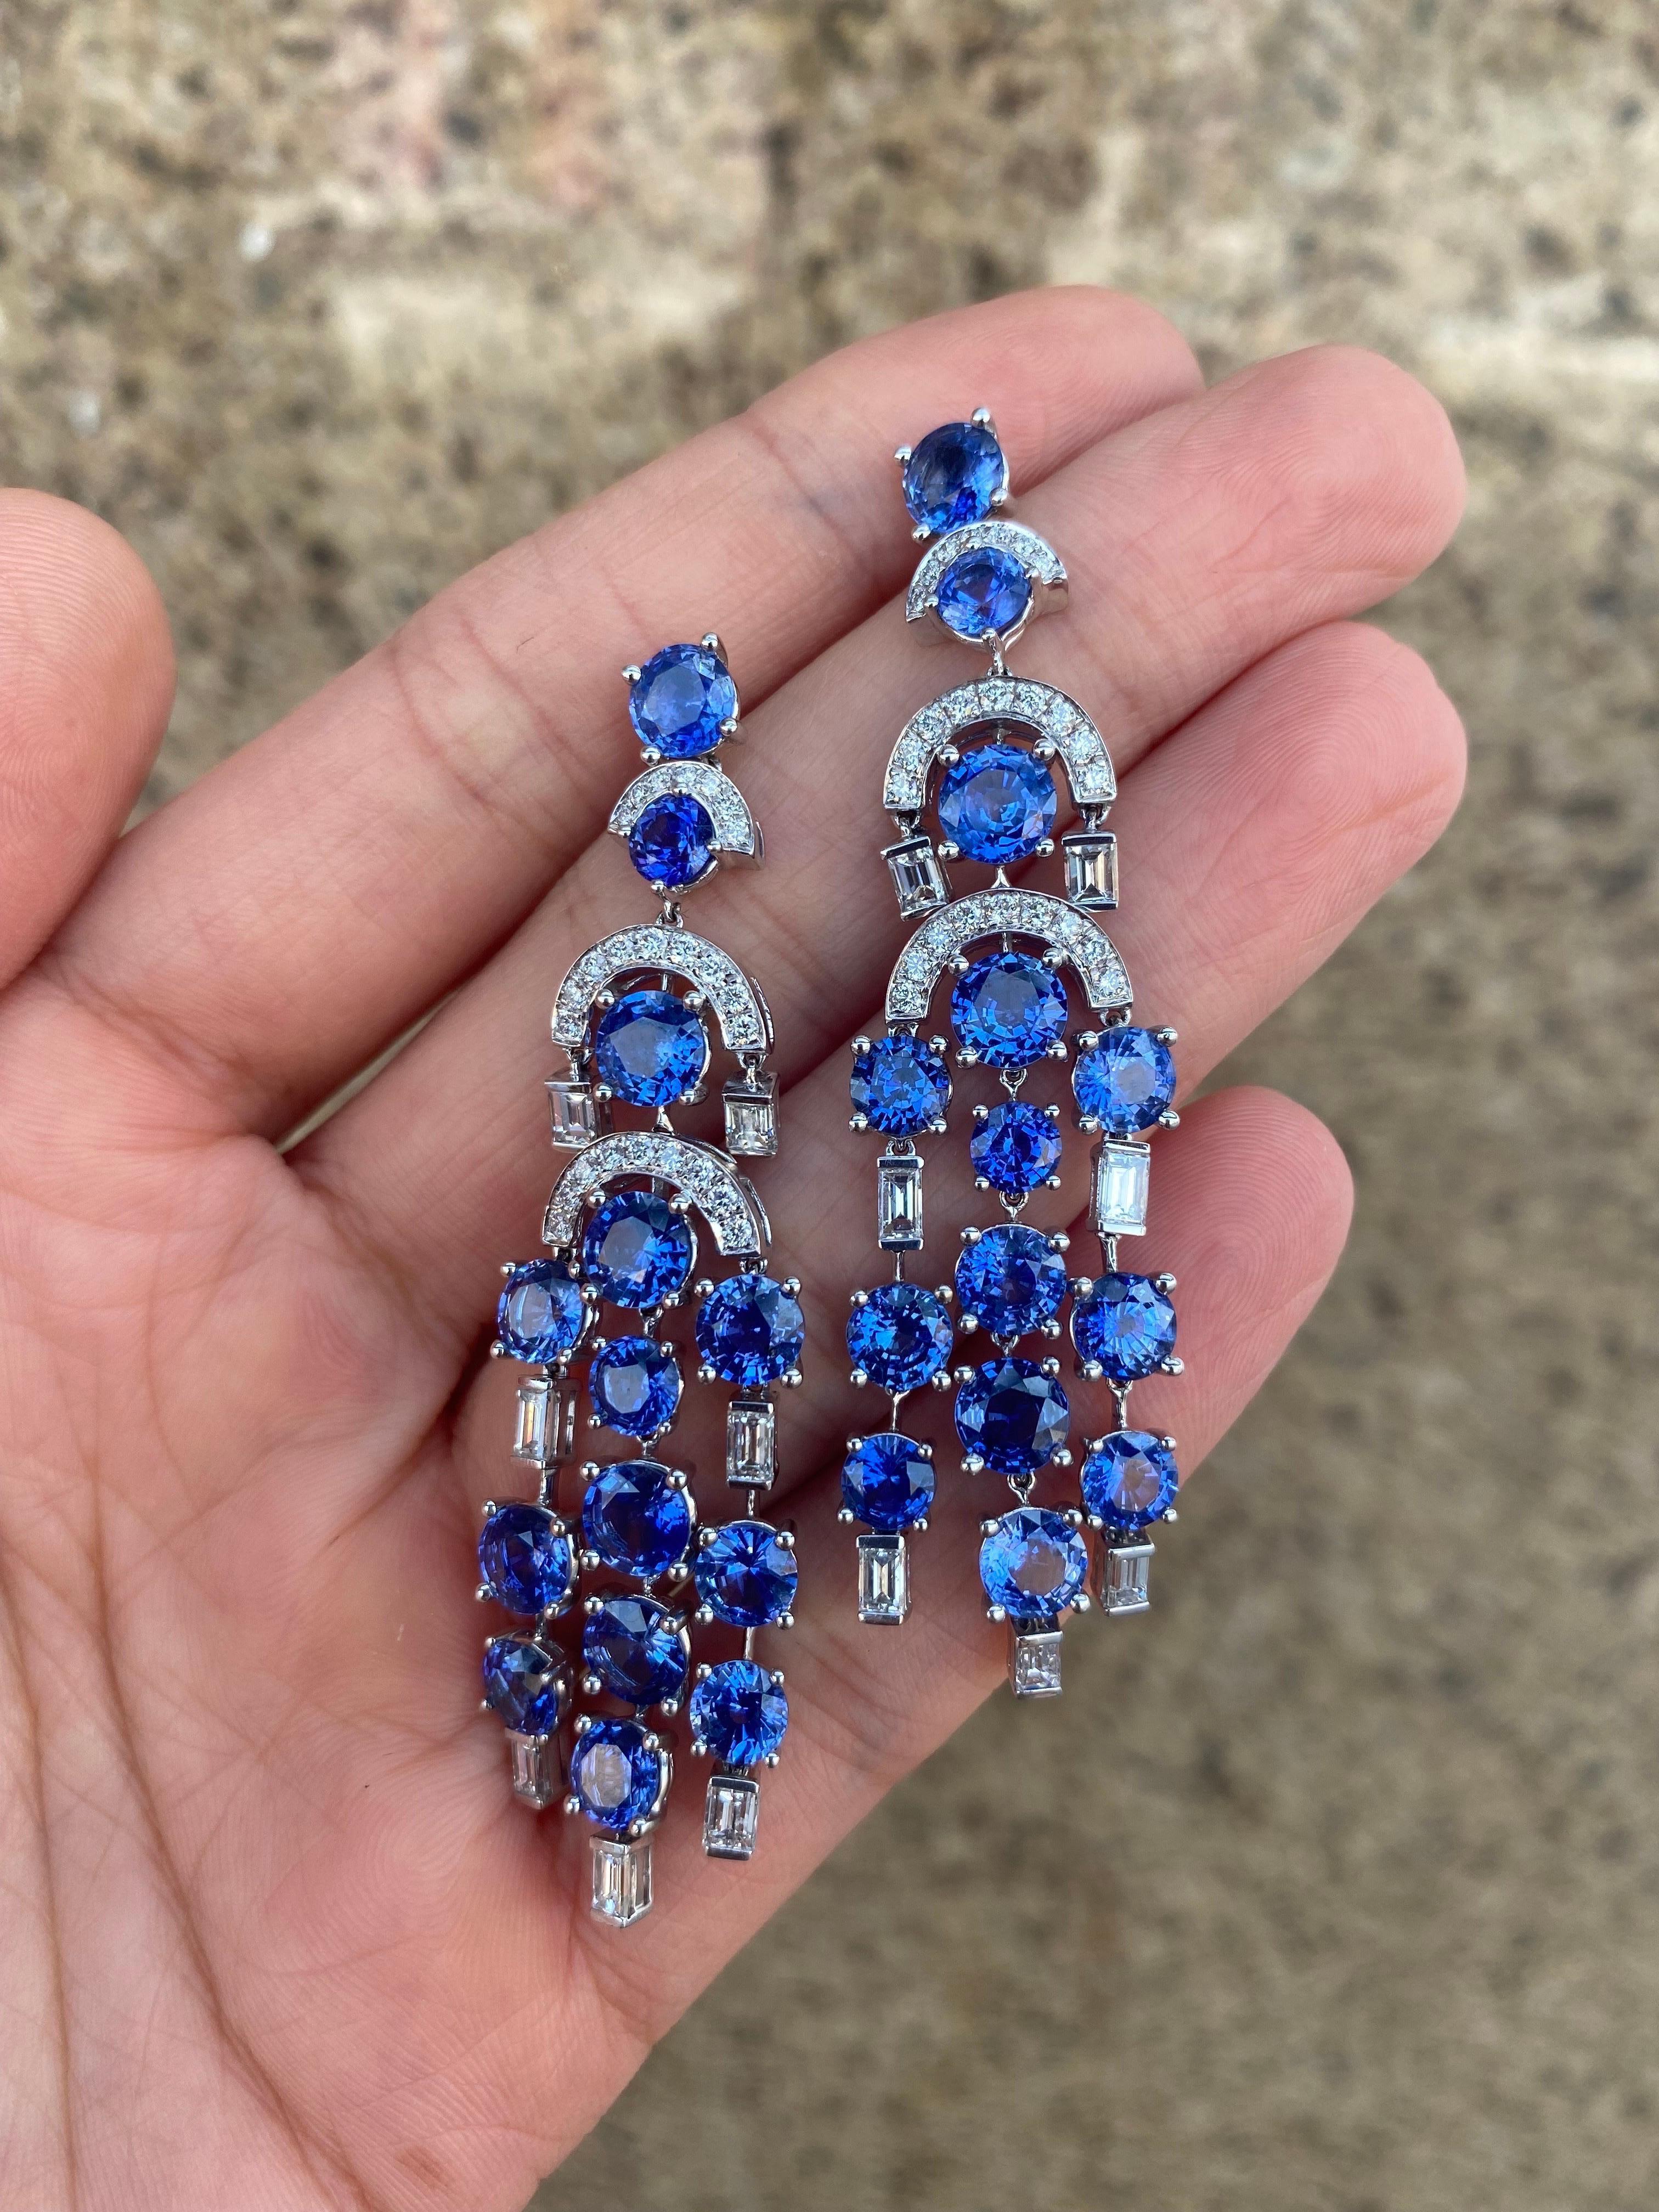 A pair of stunning, natural round shaped Blue Sapphire and Diamond dangle earrings, all sent in solid 18K White Gold. The earrings are made very carefully to be light weight, but still making the earrings look very elaborate from the art-deco era.